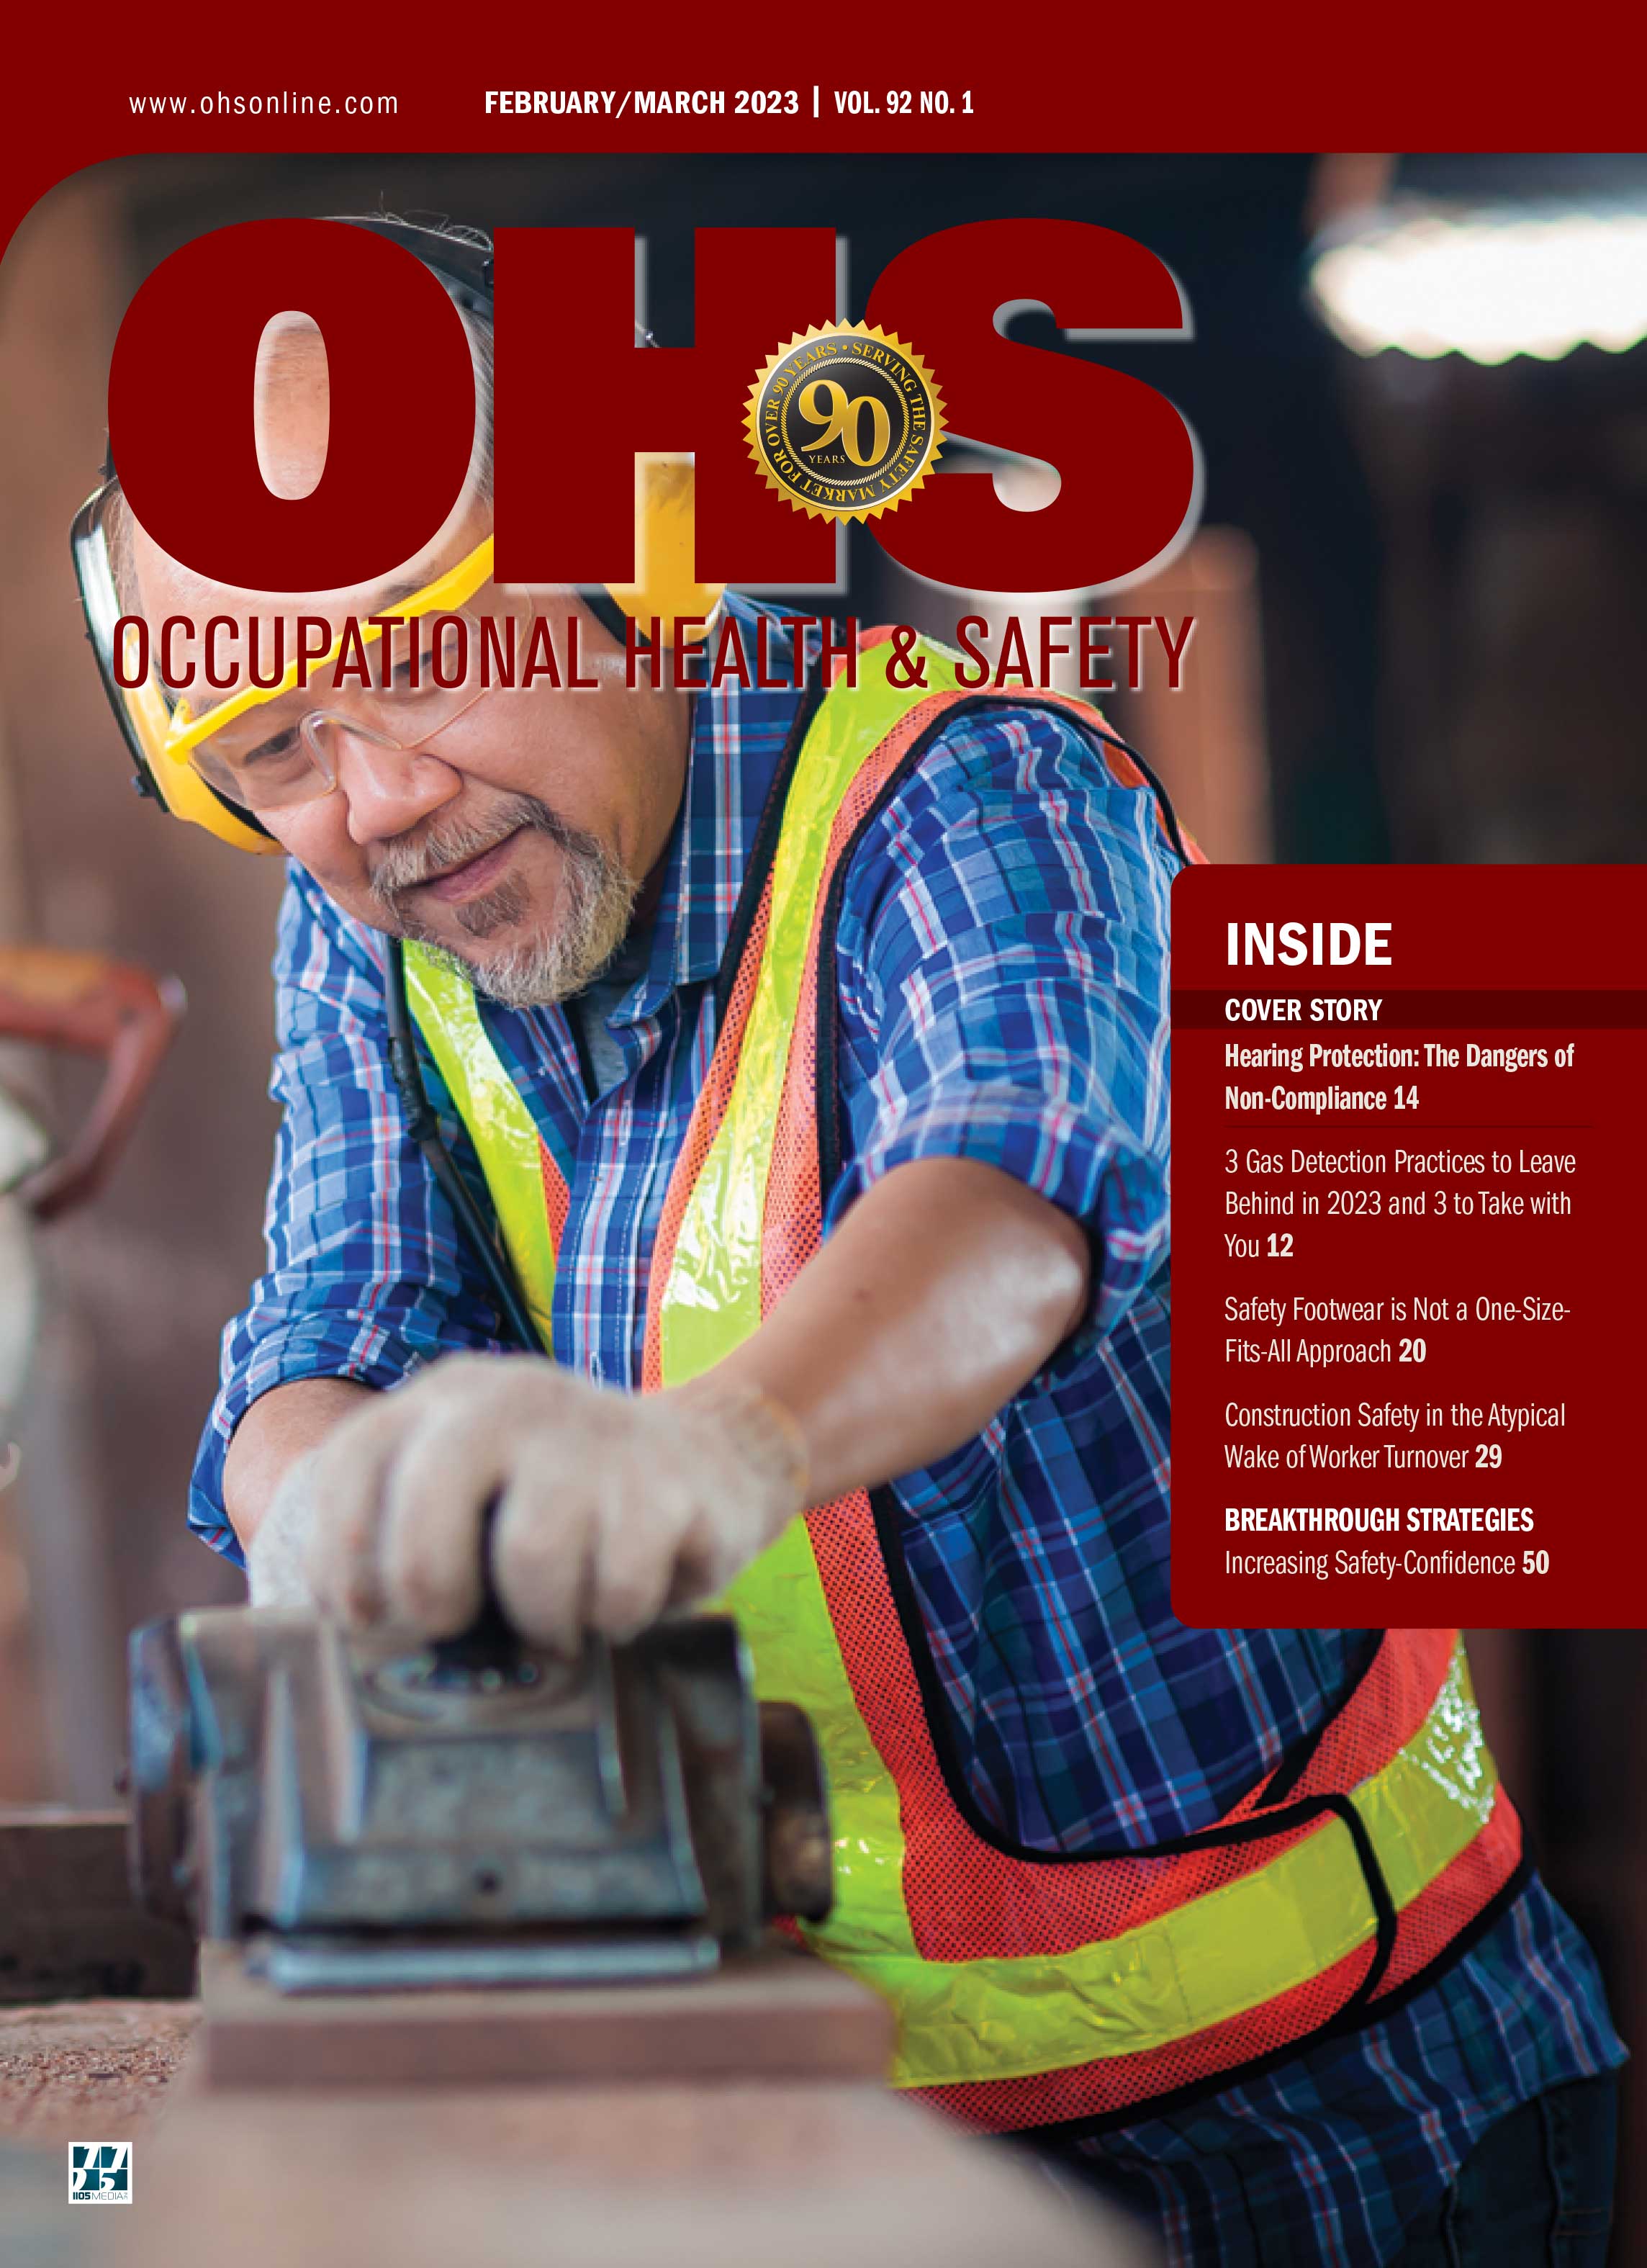 magazine cover of man in blue checkered shirt with yellow and orange vest wearing hearing, eye and hand protection while sanding object